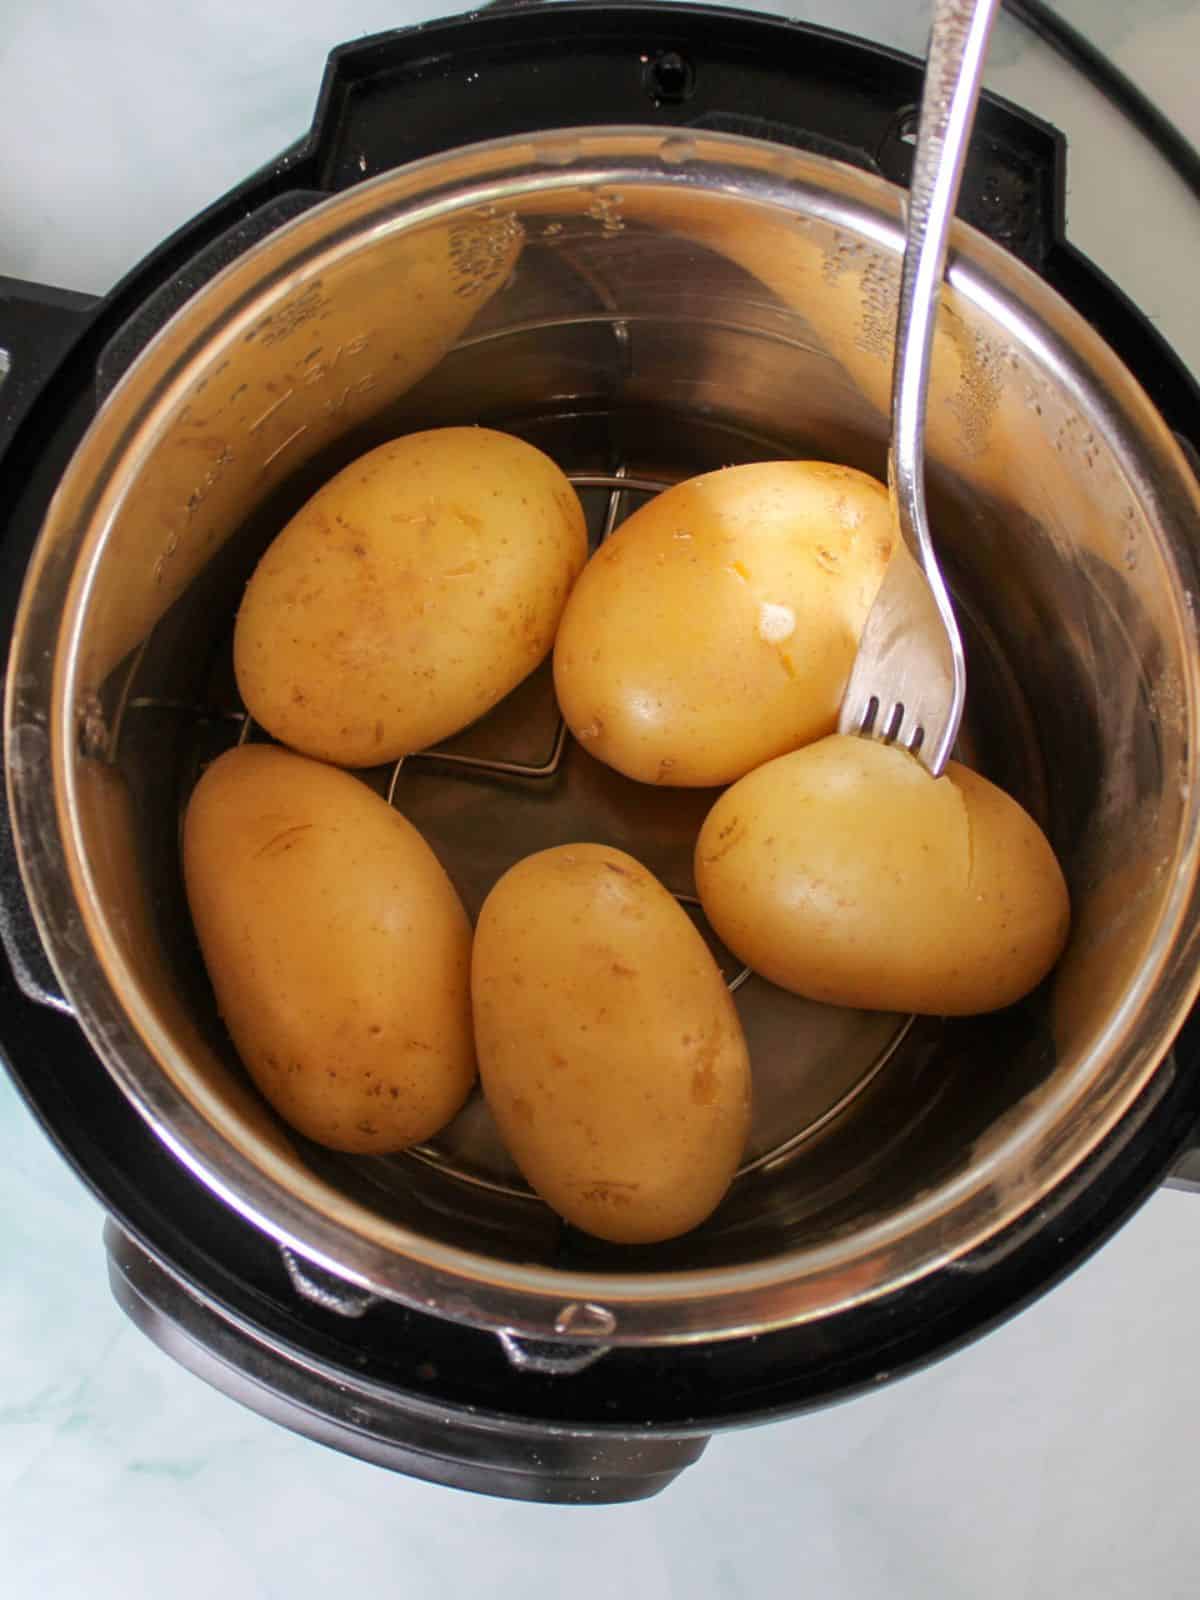 Overhead shot of five whole potatoes inside the instant pot. There is a fork pierced in one of the potatoes to show doneness.